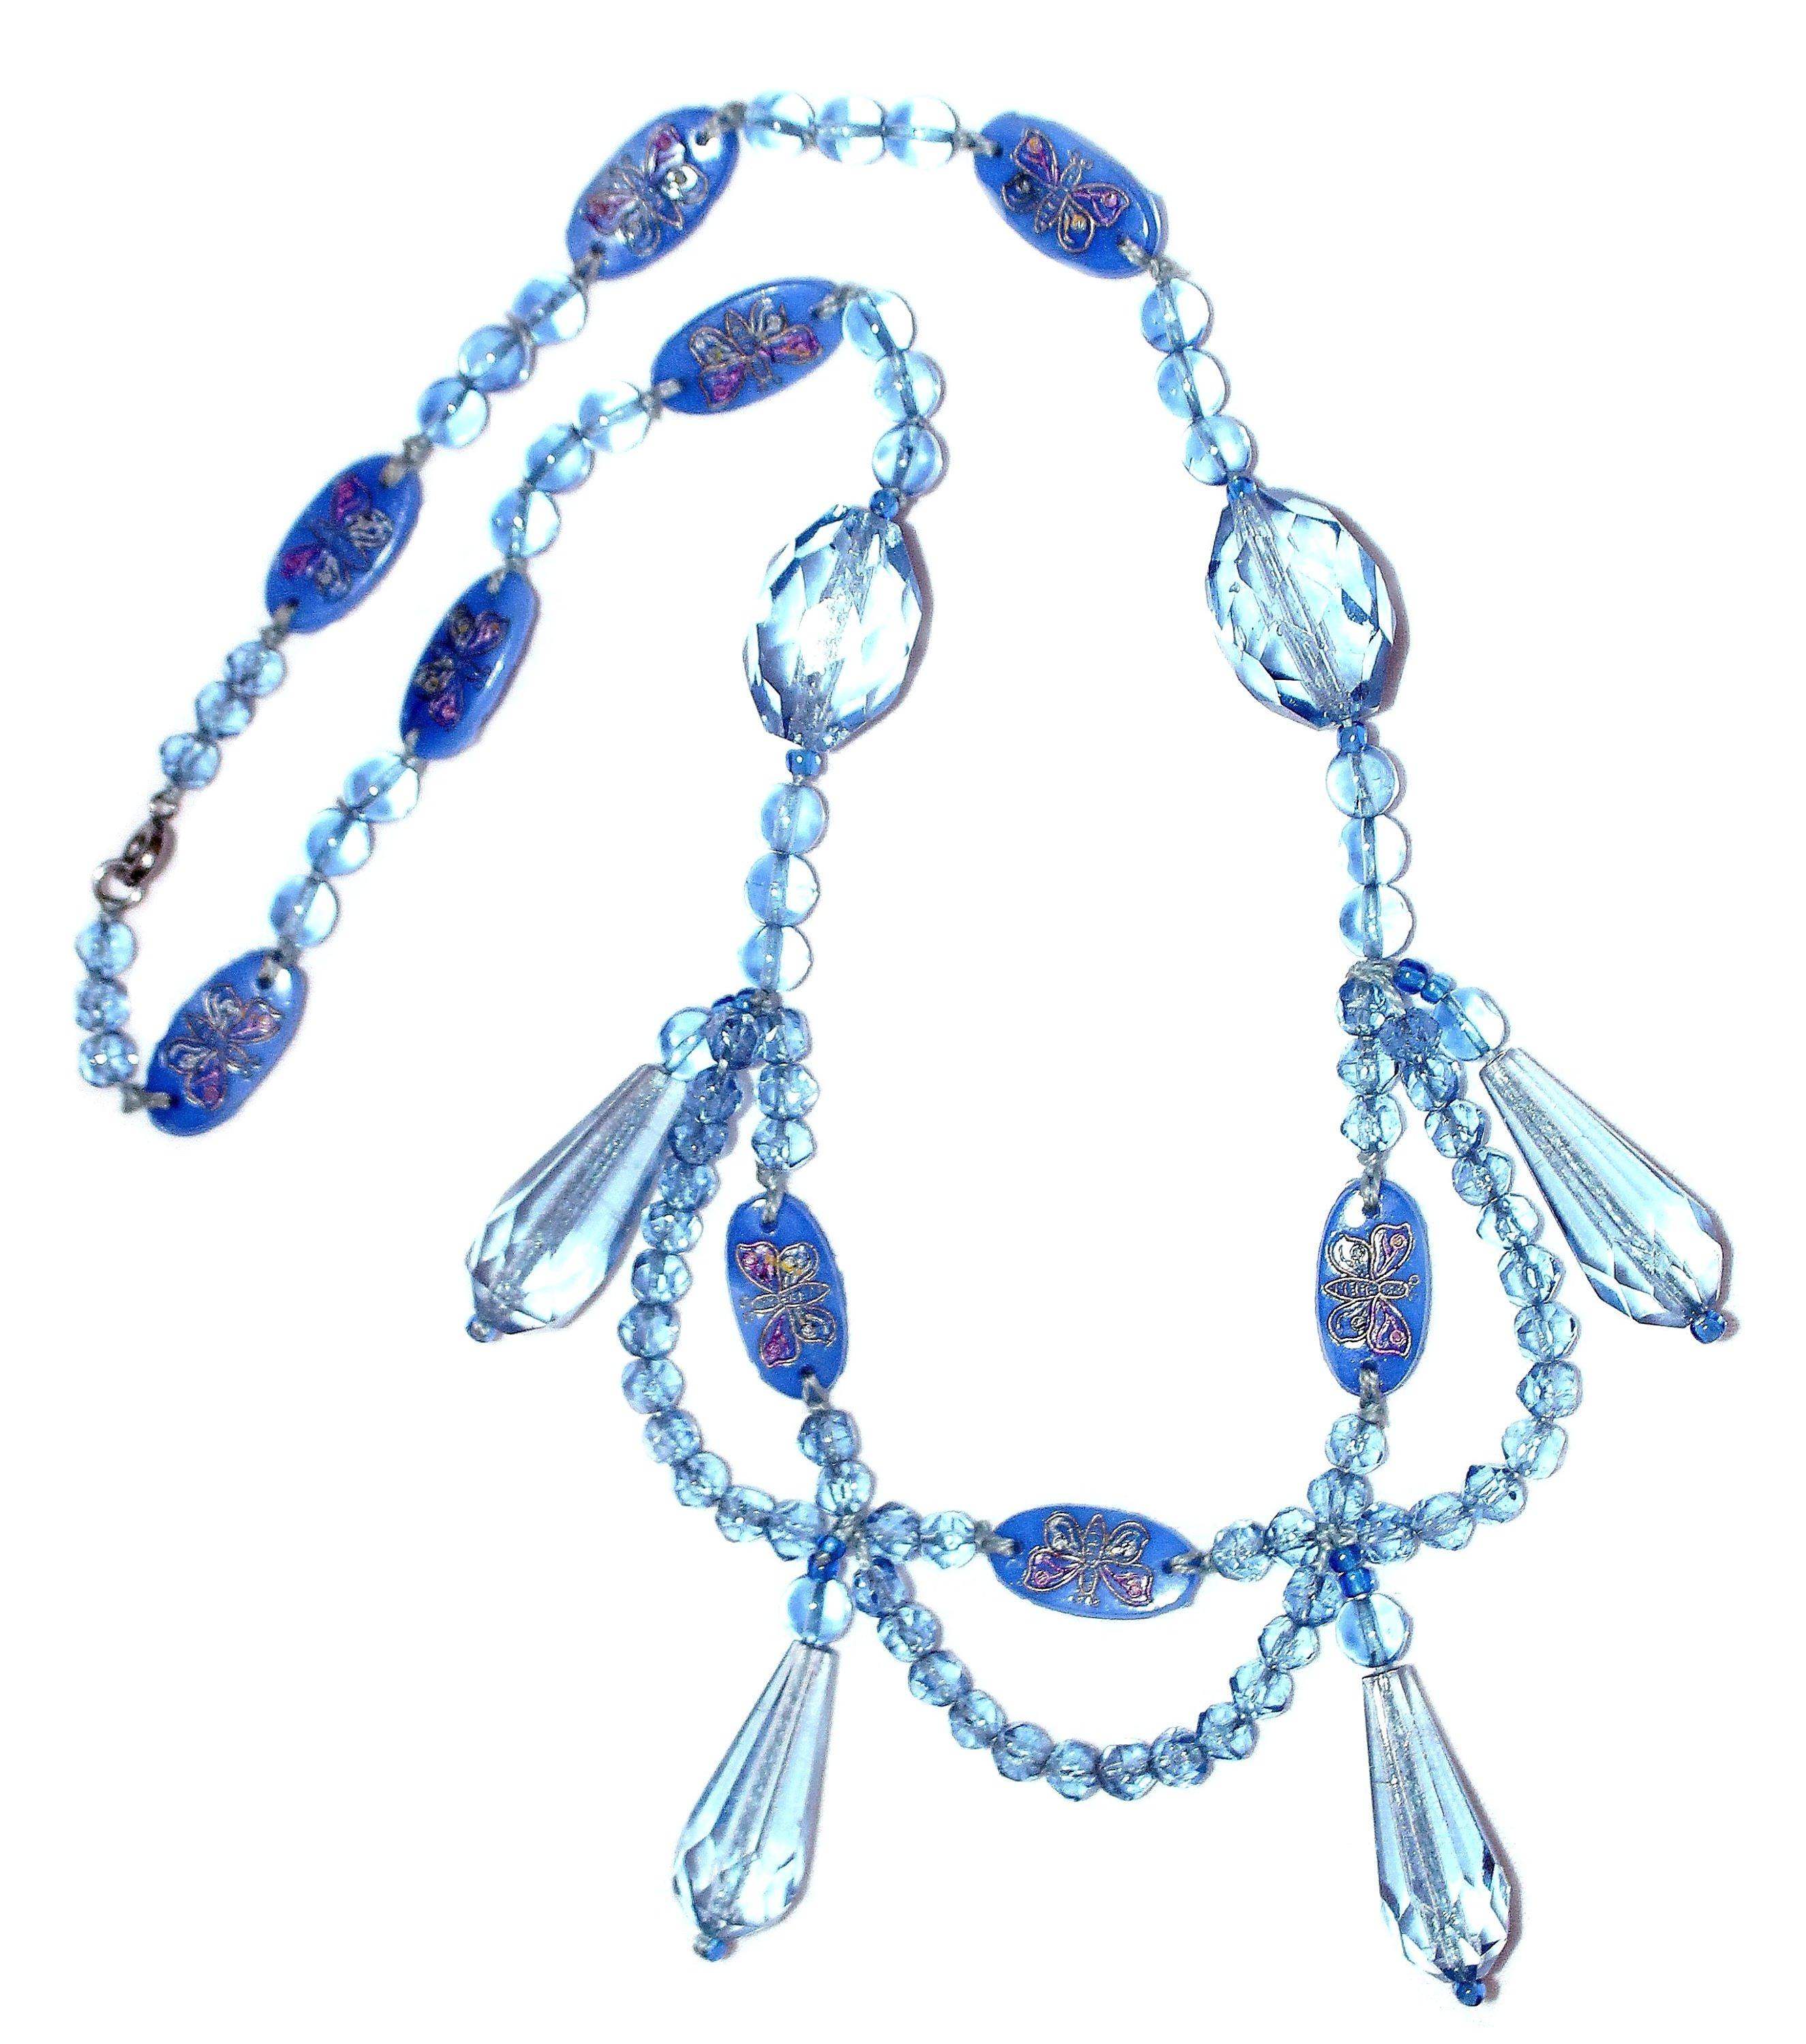 Circa 1920s to 1930s light blue faceted and smooth glass bead swag design necklace.  It is embellished with faceted drops and interspersed, blue glass oval plaques hand painted with butterflies.  The necklace is 20